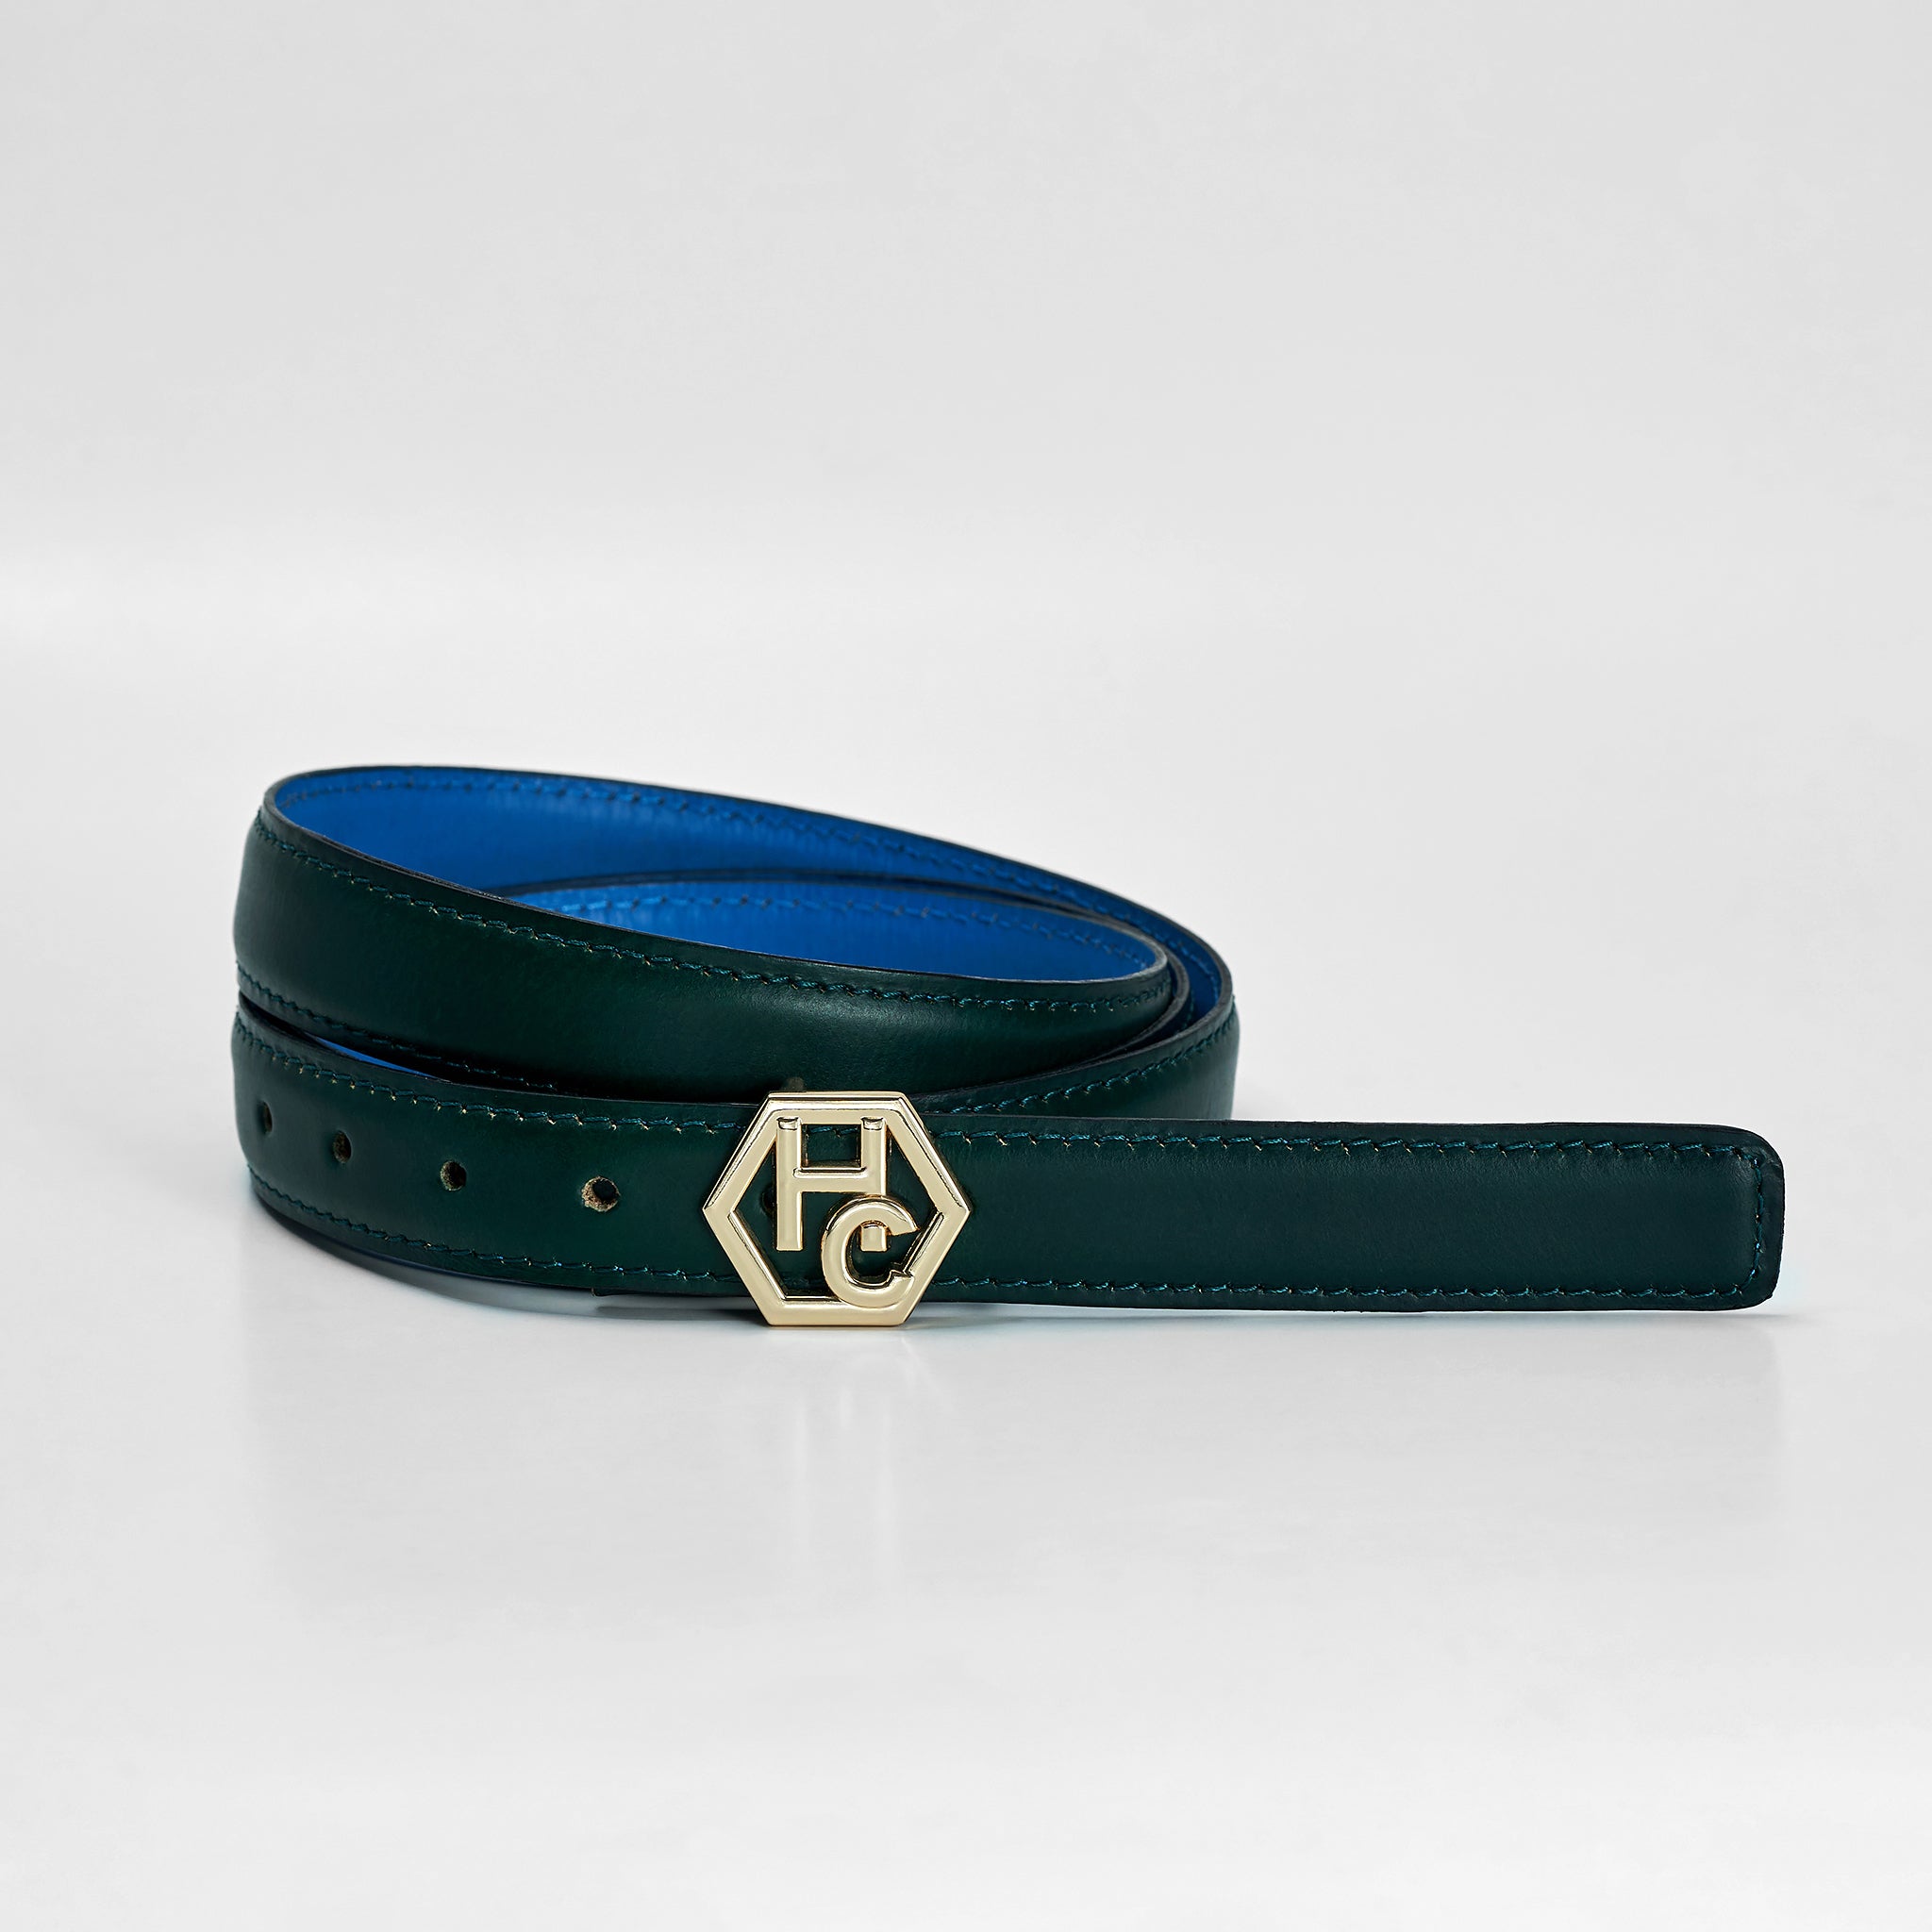 Hedonist Chicago Reversible Green Leather Belt 1" 32381324230807